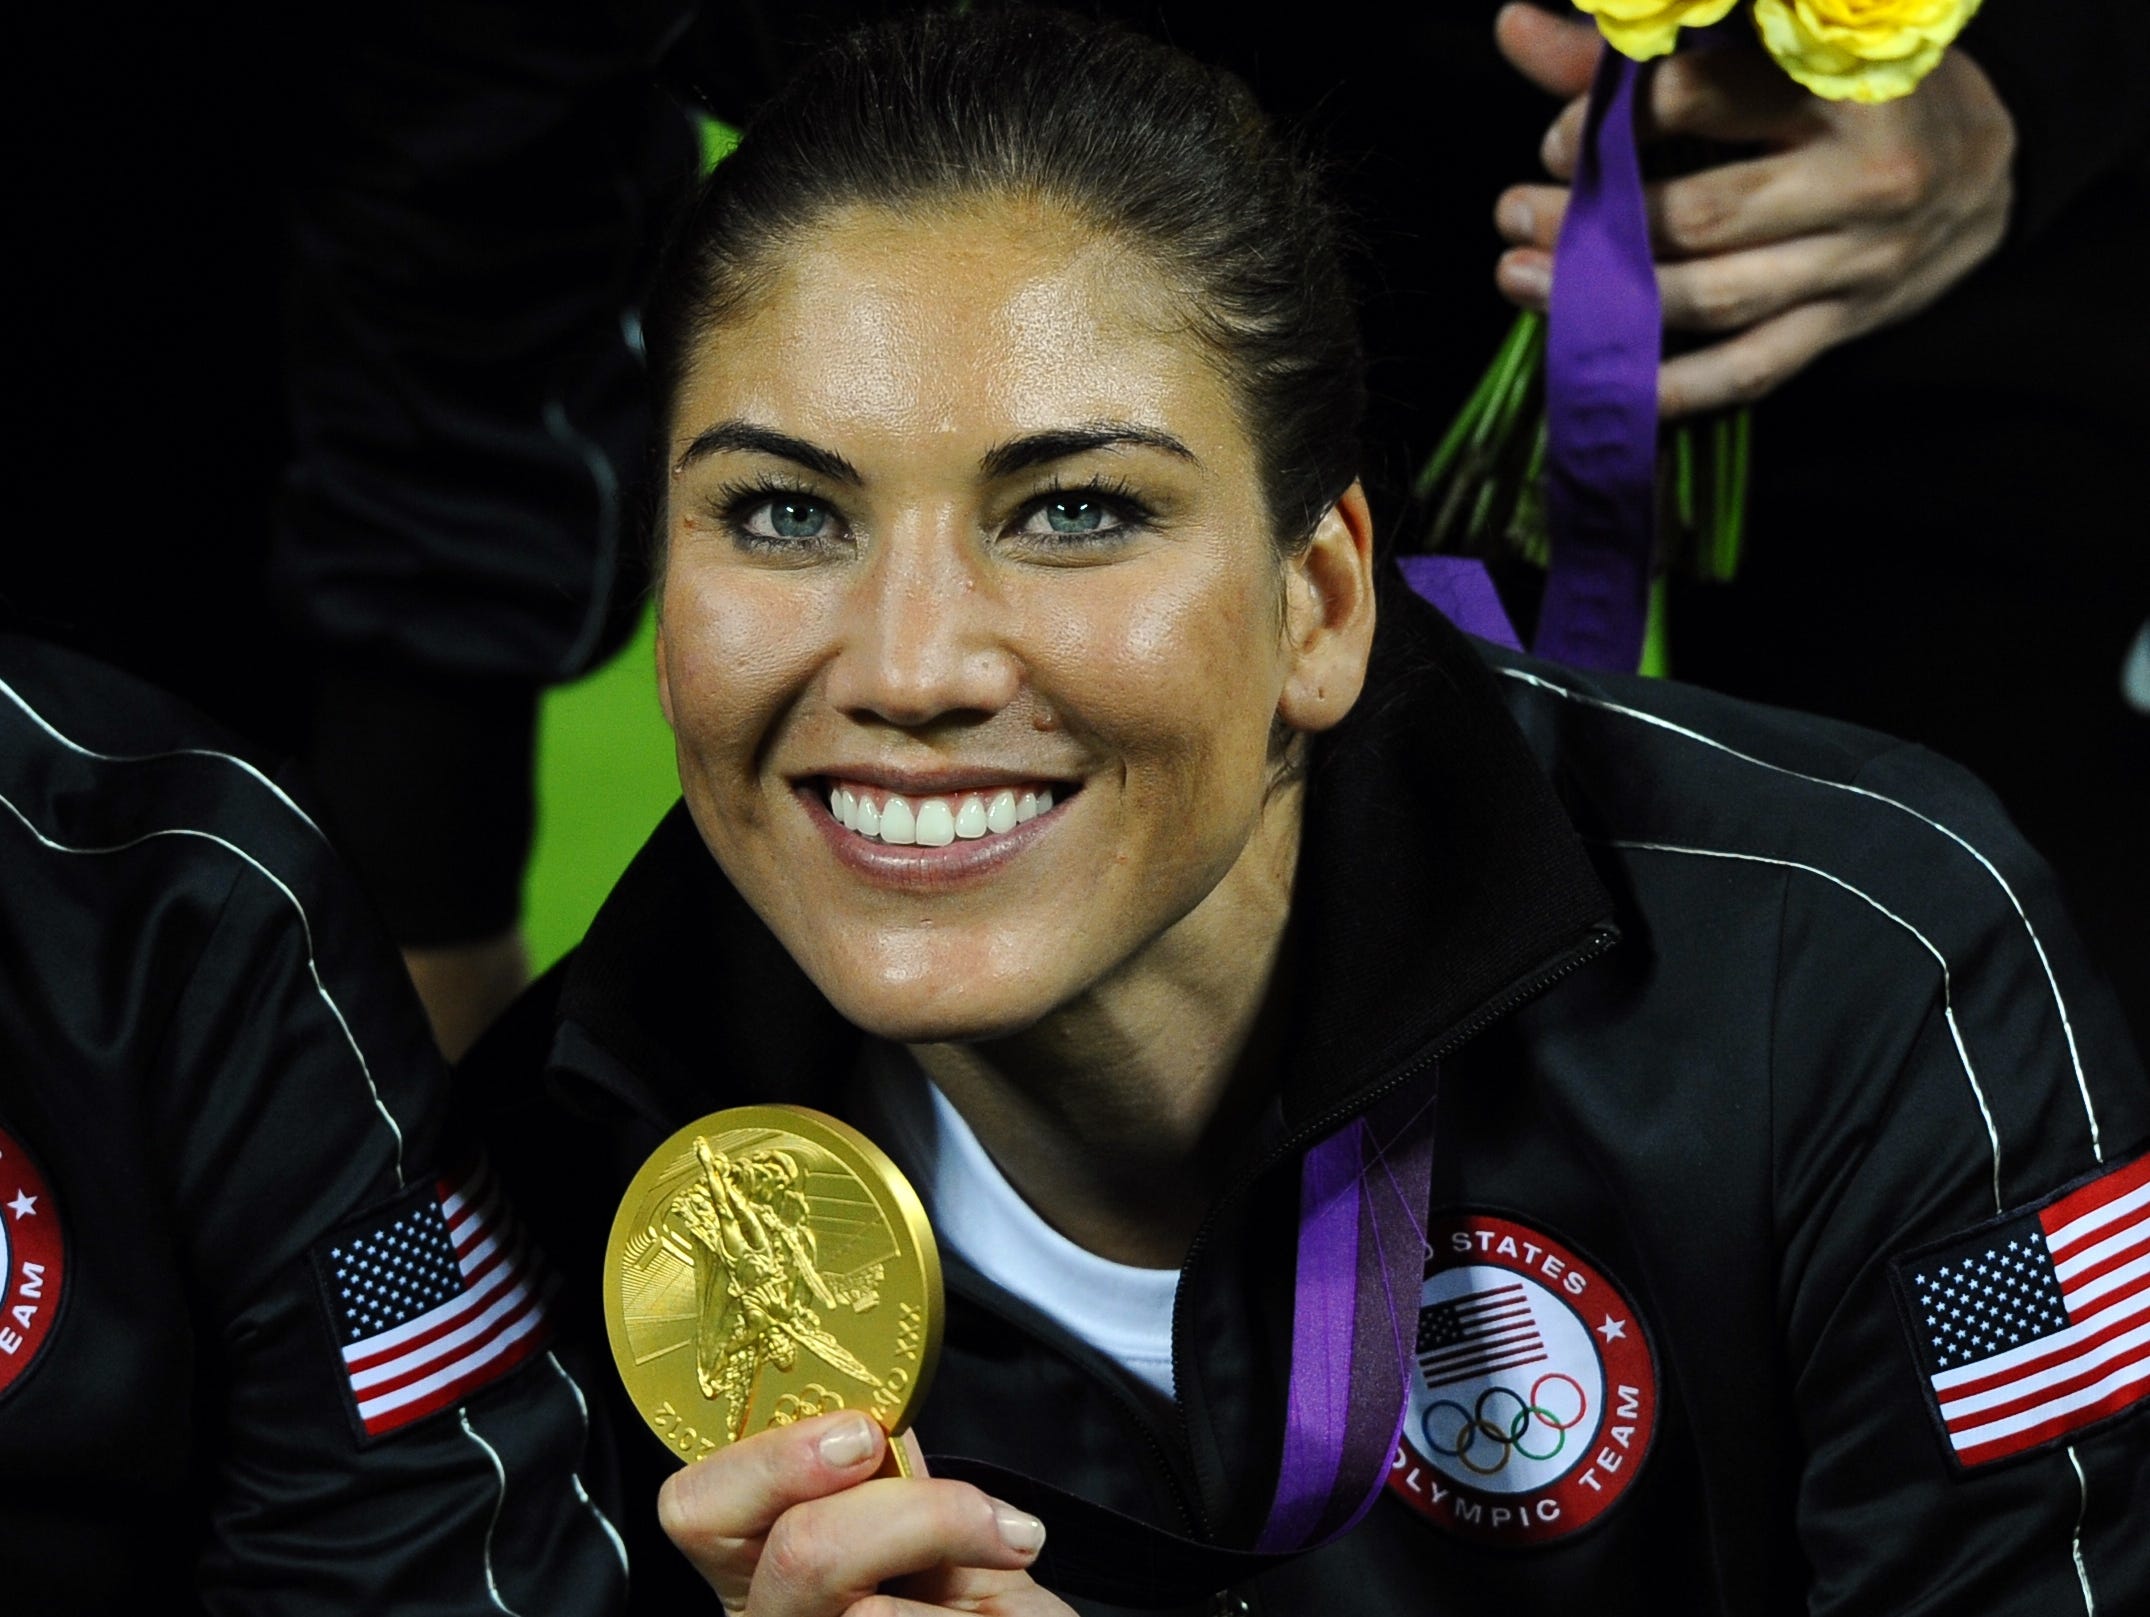 HOPE SOLO involved in assault case before wedding